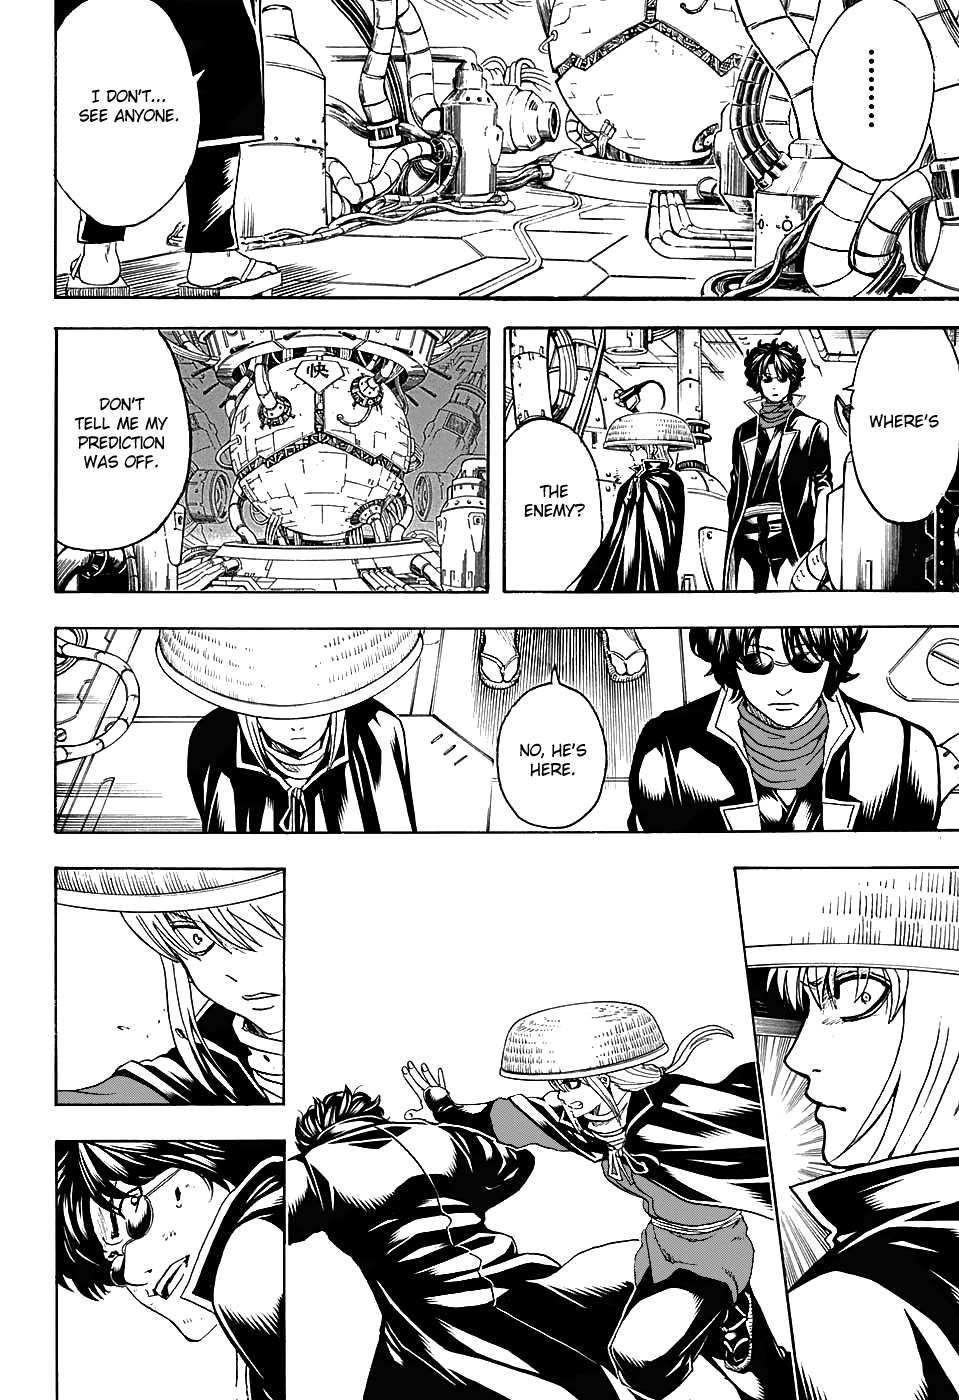 Gintama chapter 566 page 15